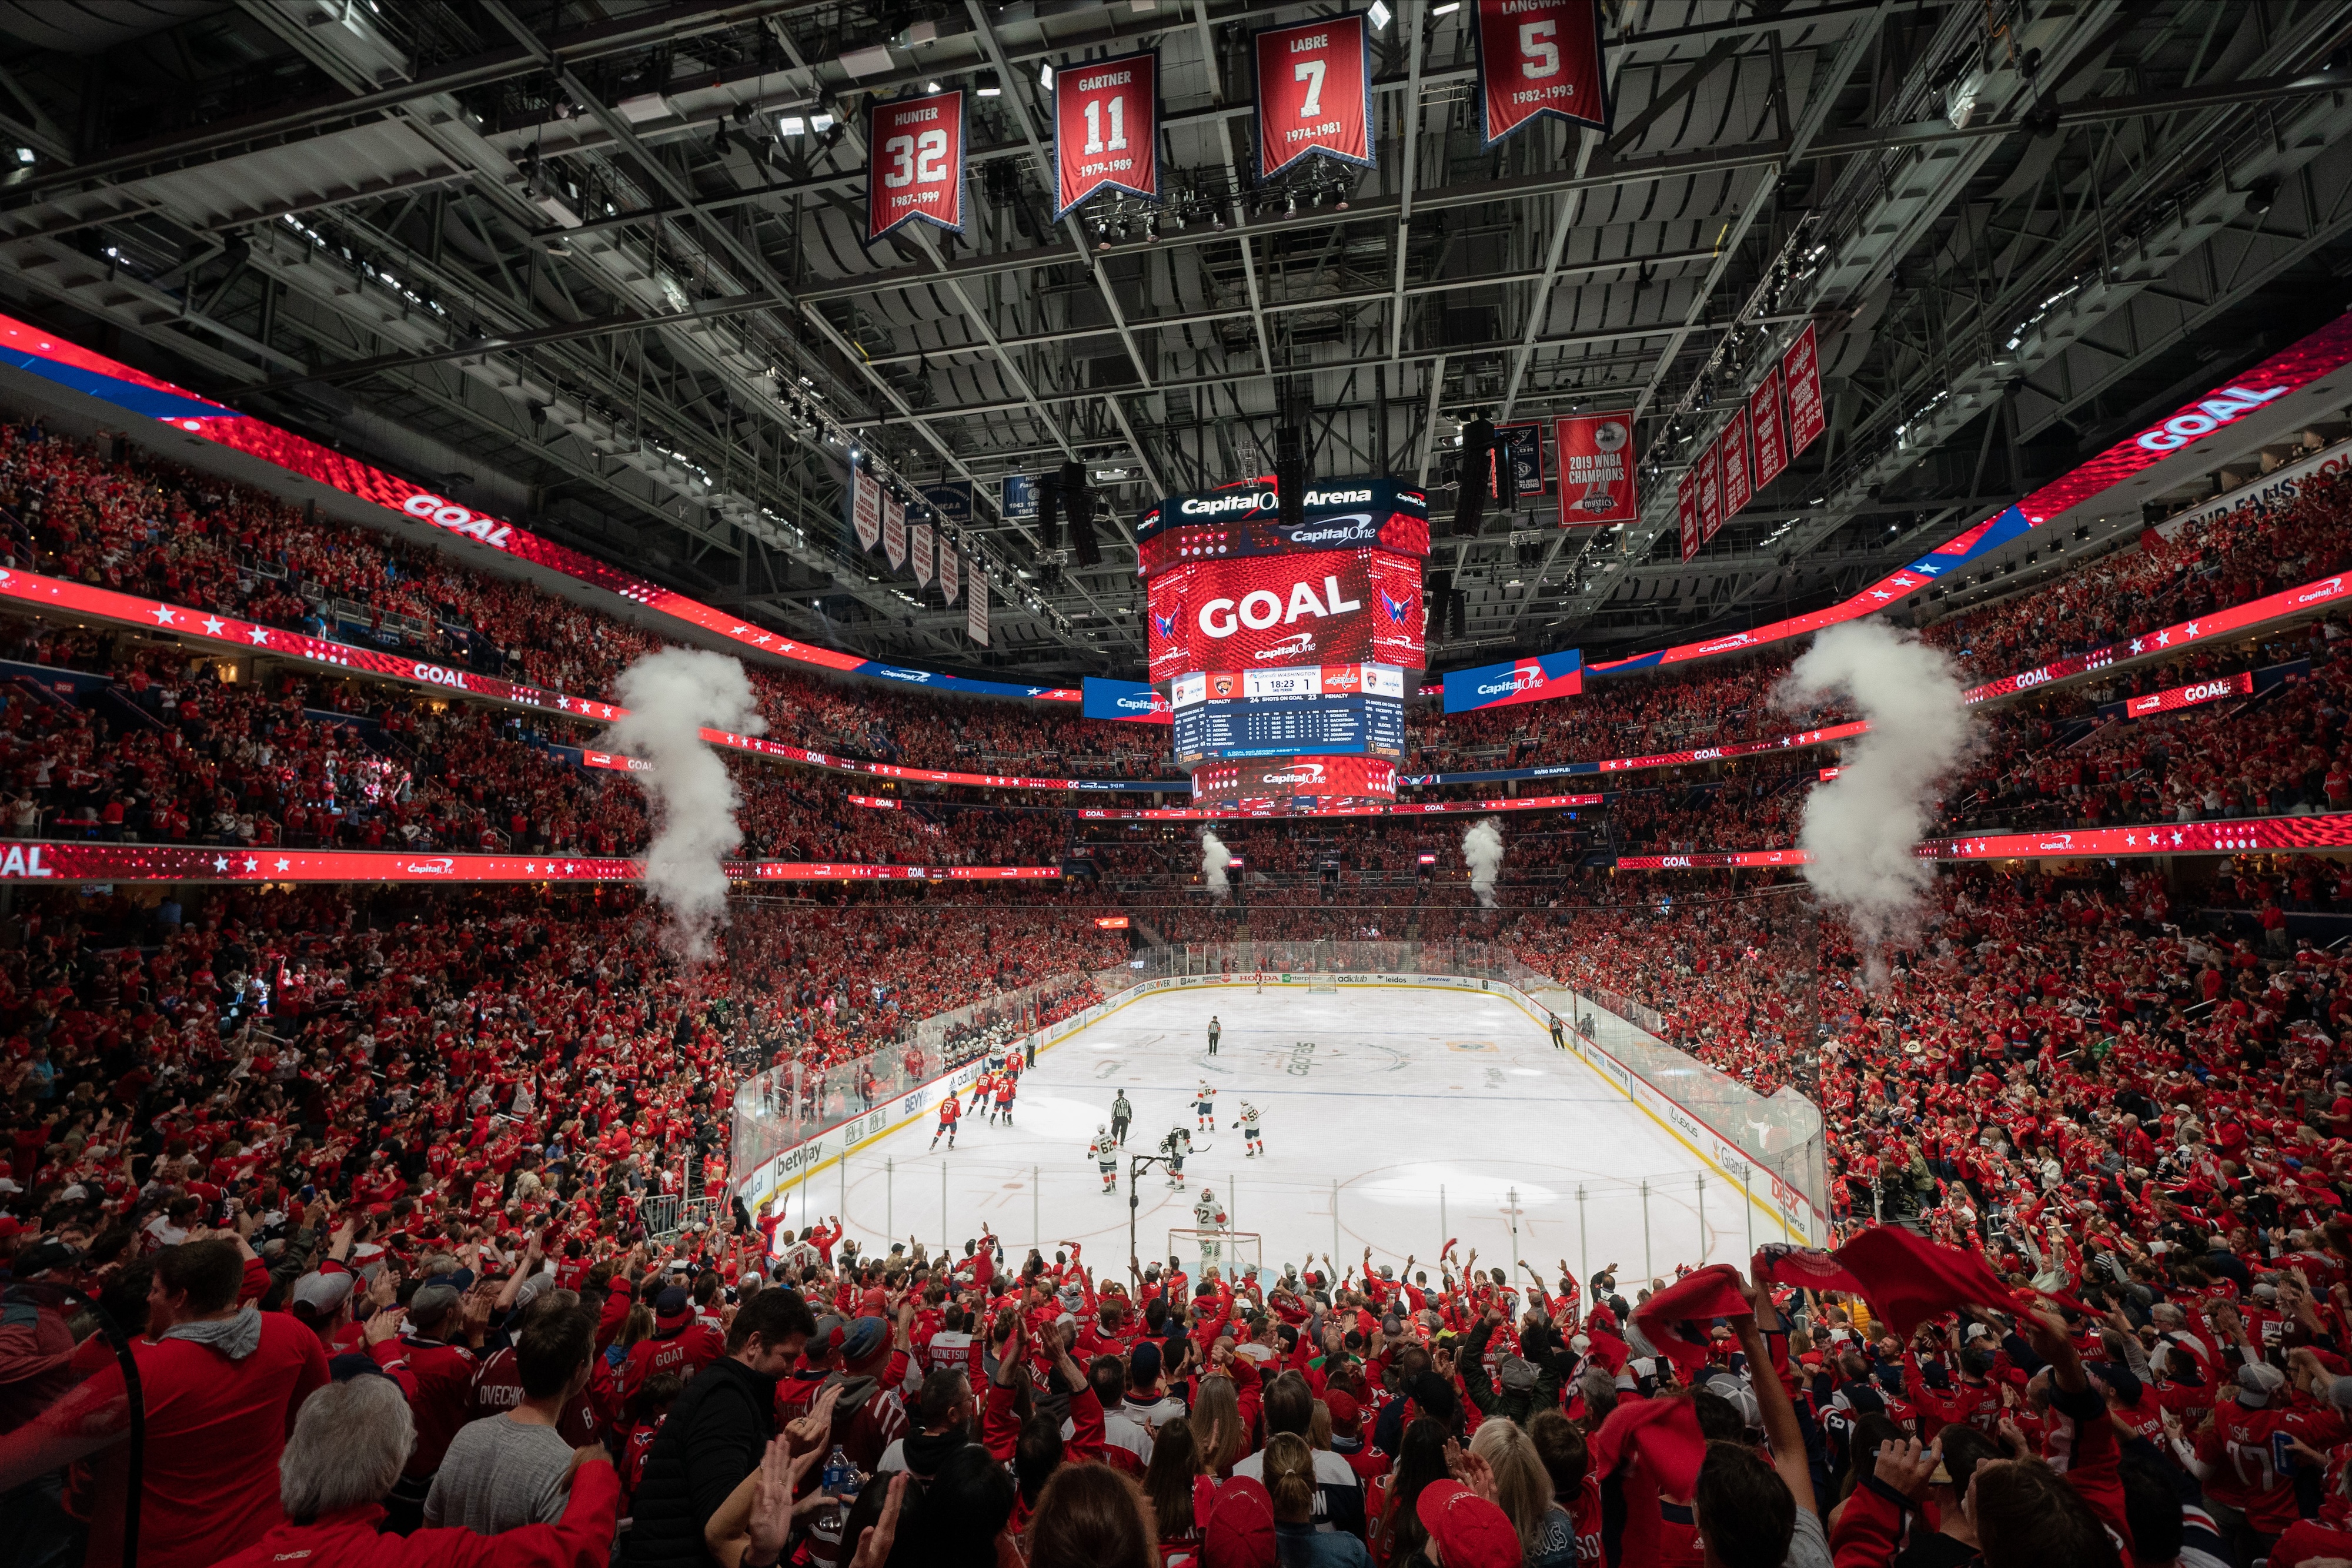 Capital One Arena - All You Need to Know BEFORE You Go (with Photos)